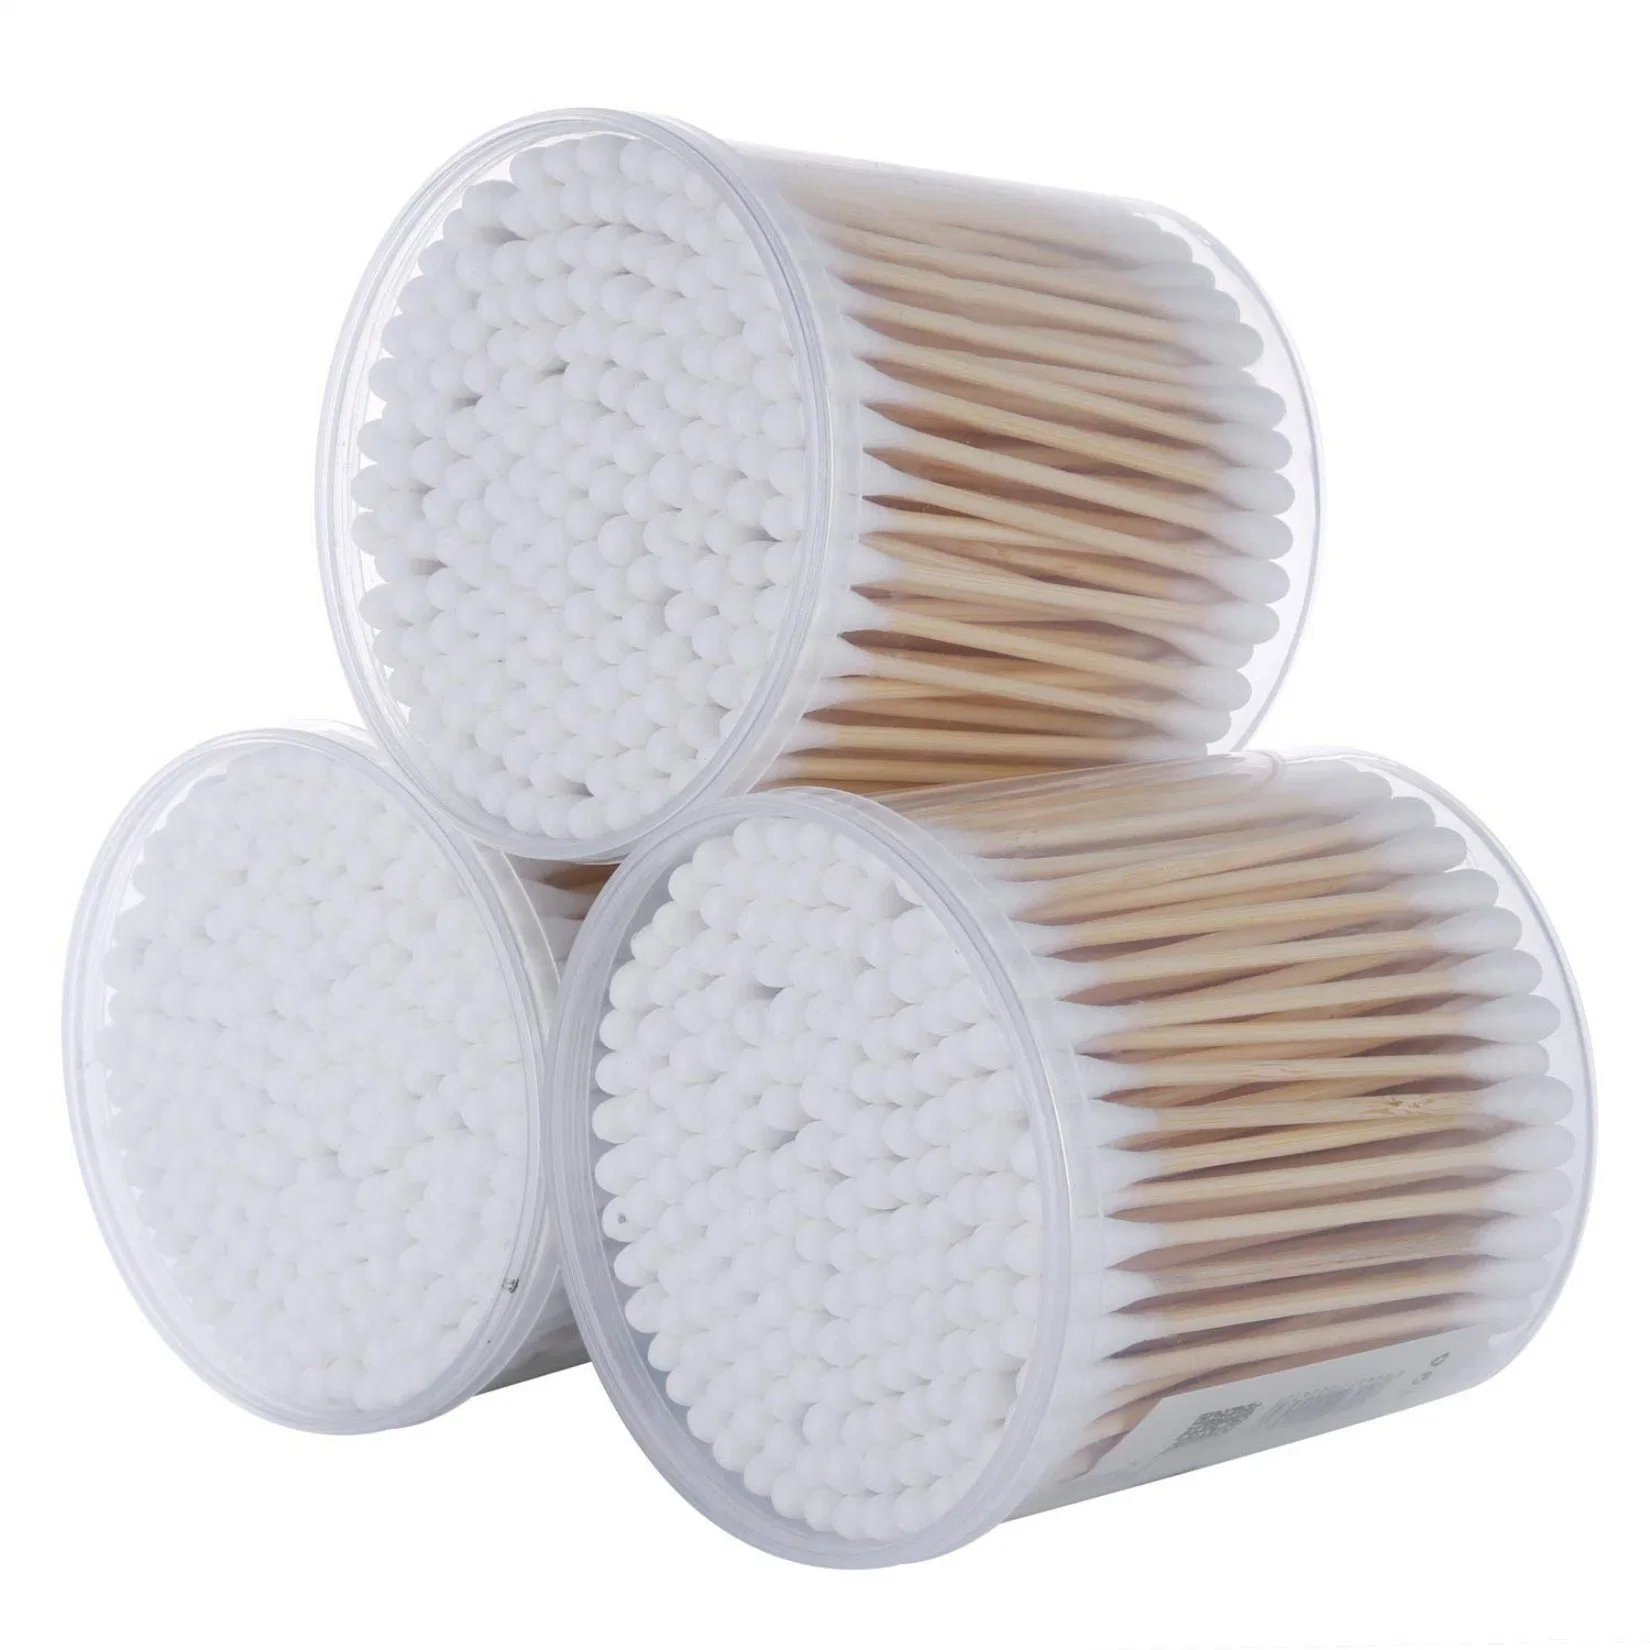 100PCS Double Head Cotton Swab Bamboo Cotton Swabs Wood Sticks Disposable Buds Cotton for Nose Ears Cleaning Tools